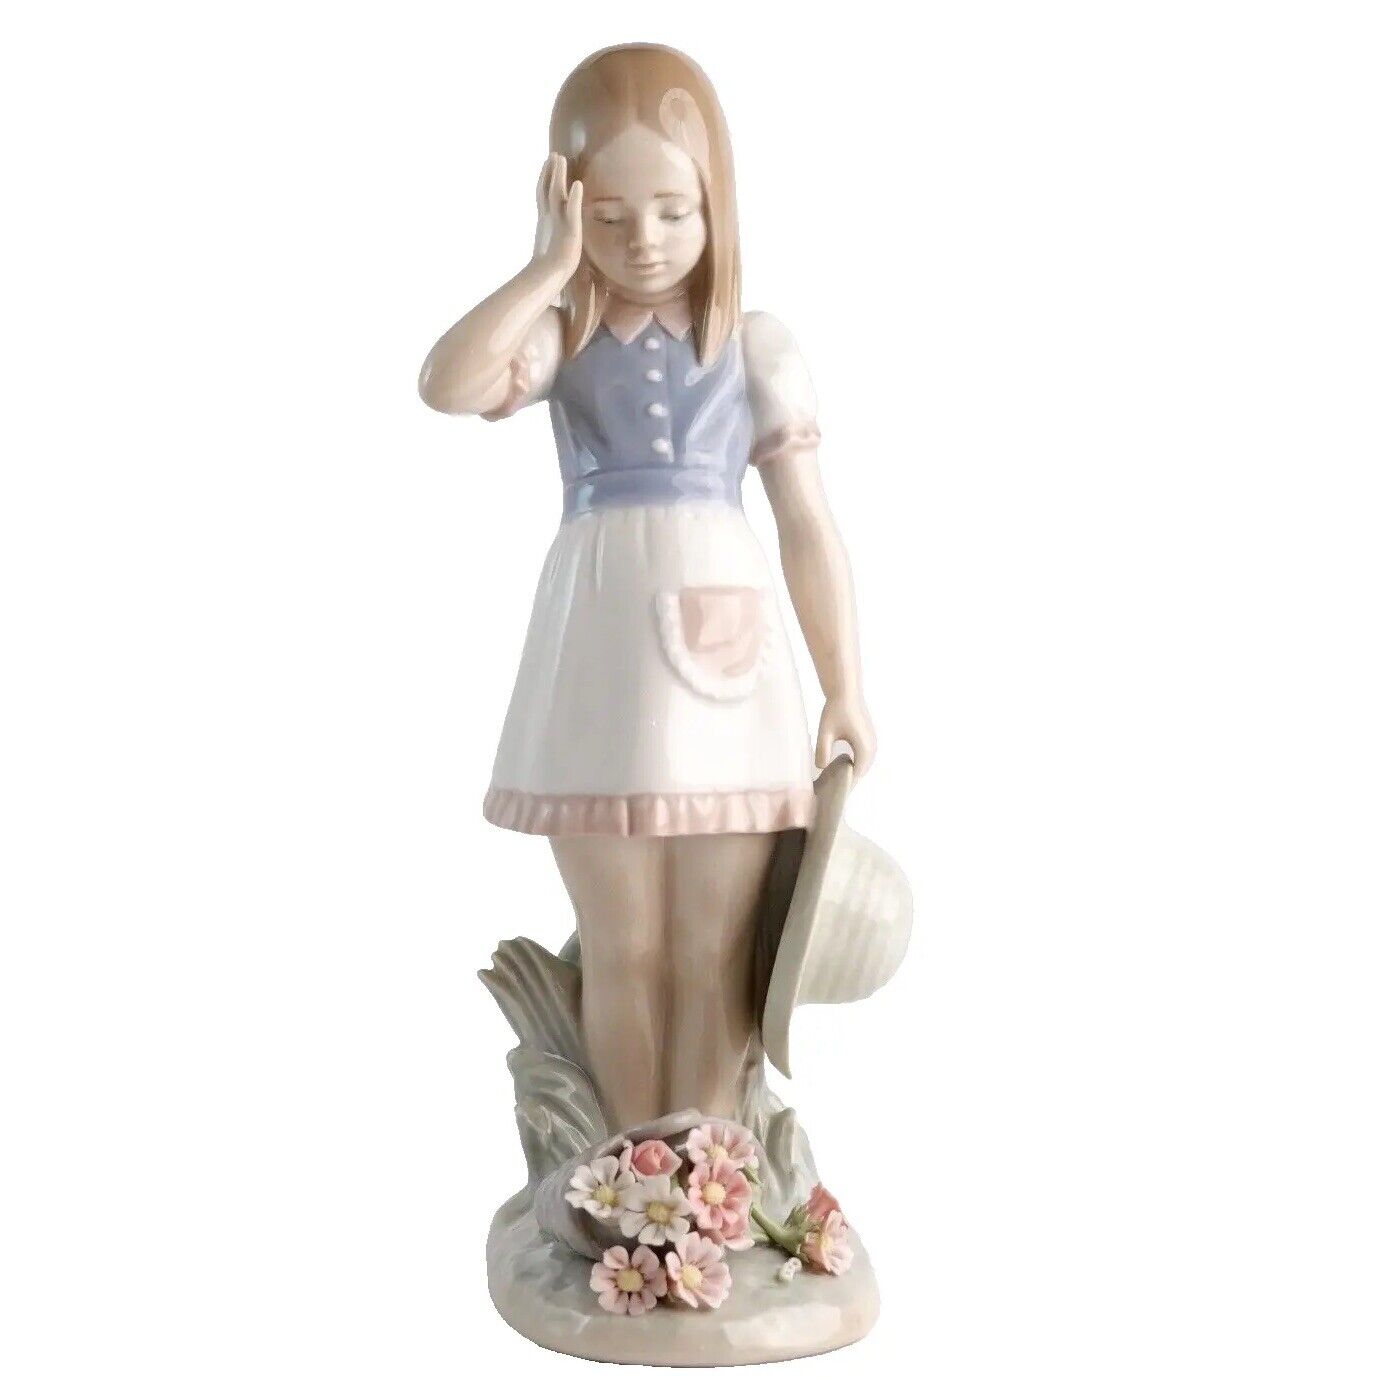 Lladro #1285 Dropping The Flowers Oh My Goodness Figurine - Original Box